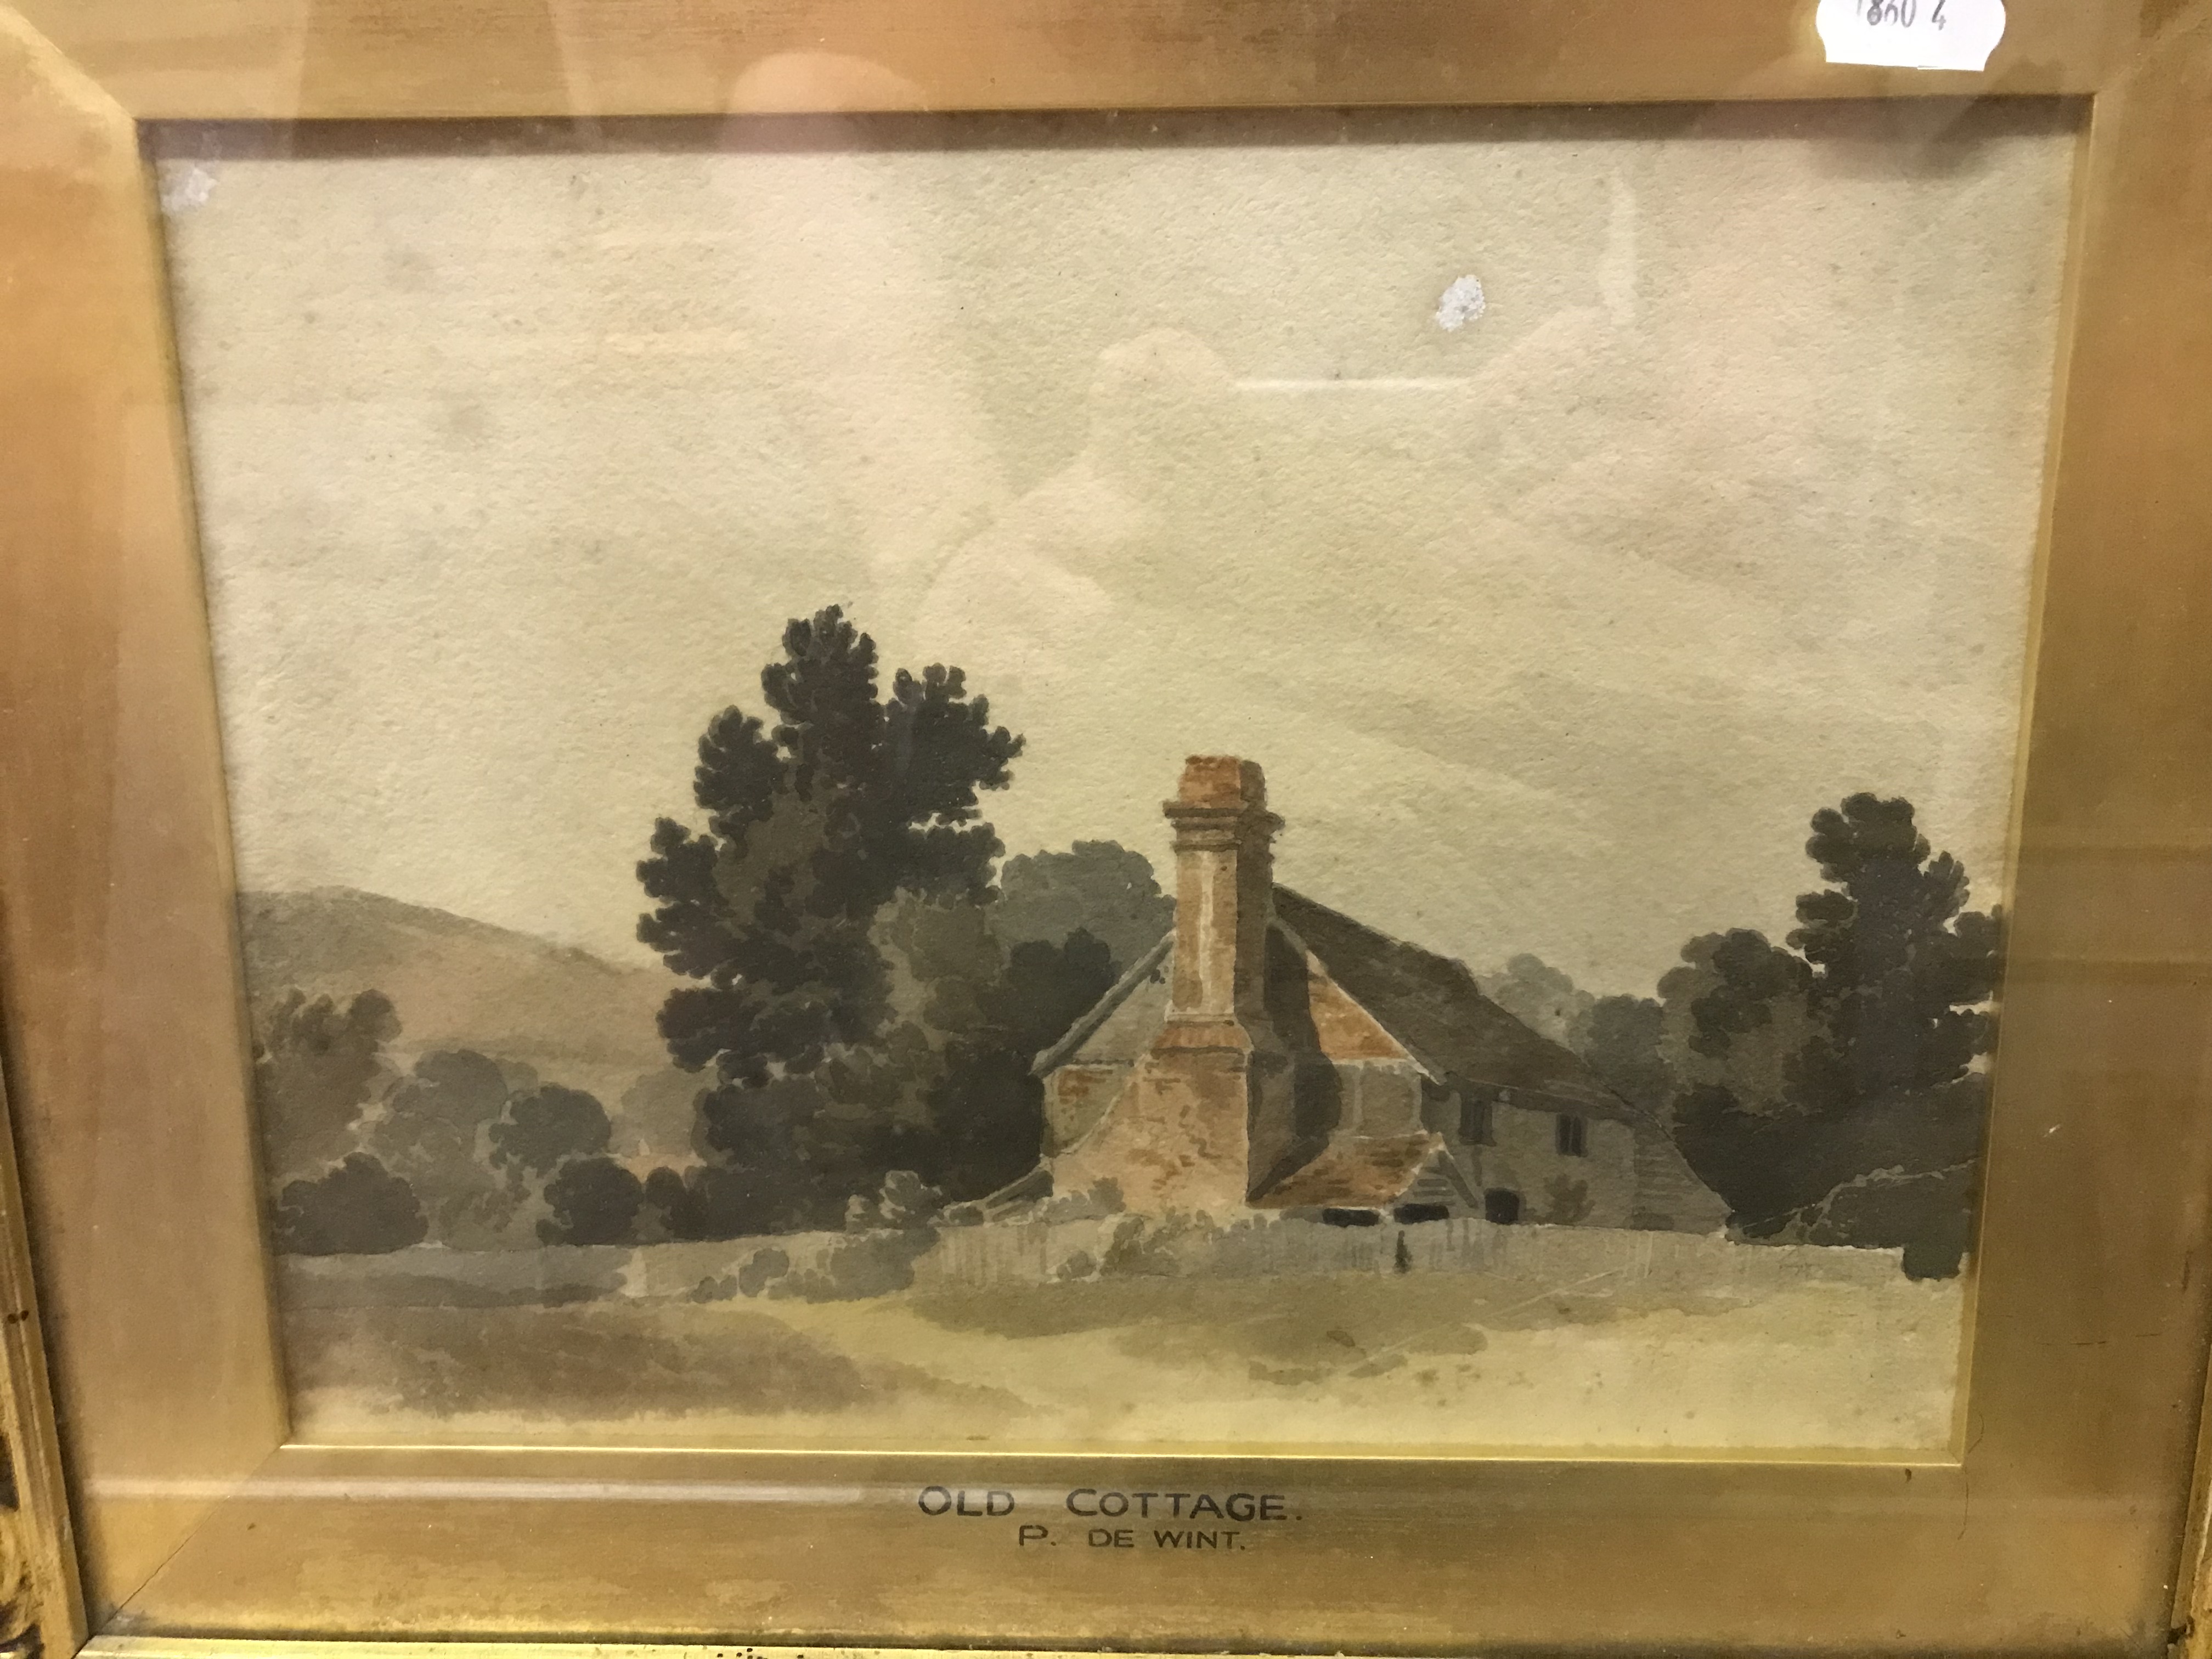 ATTRIBUTED TO PETER DE WINT "Old cottage" watercolour study, inscribed to frame, - Image 3 of 3